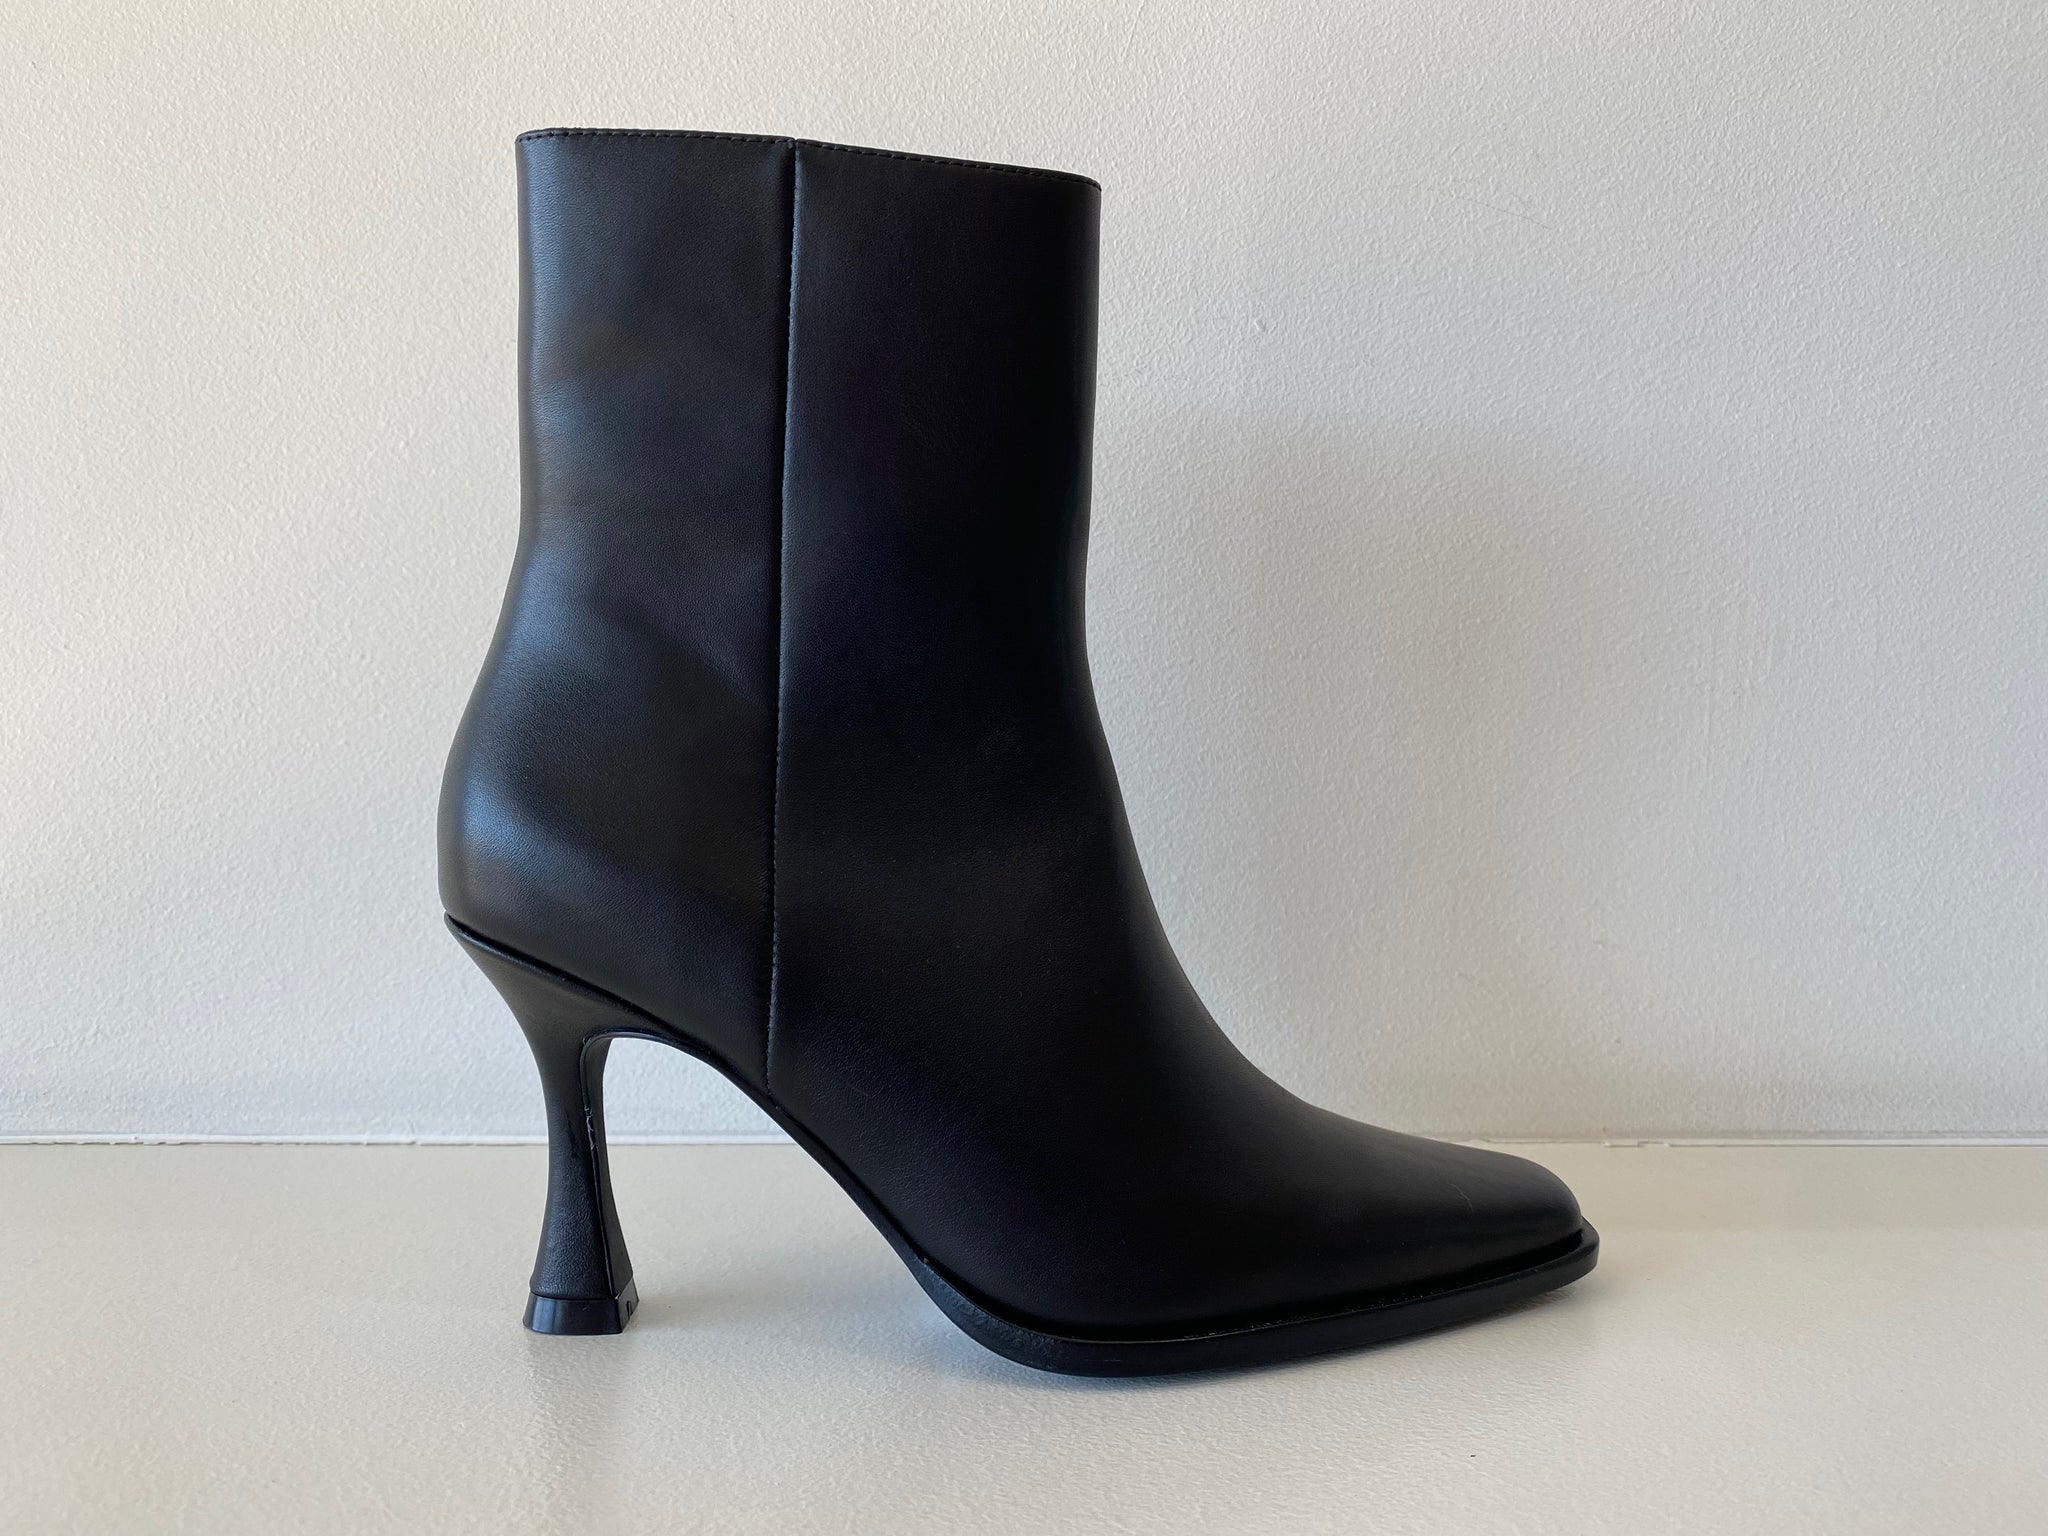 Hero Black Leather Ankle Boot